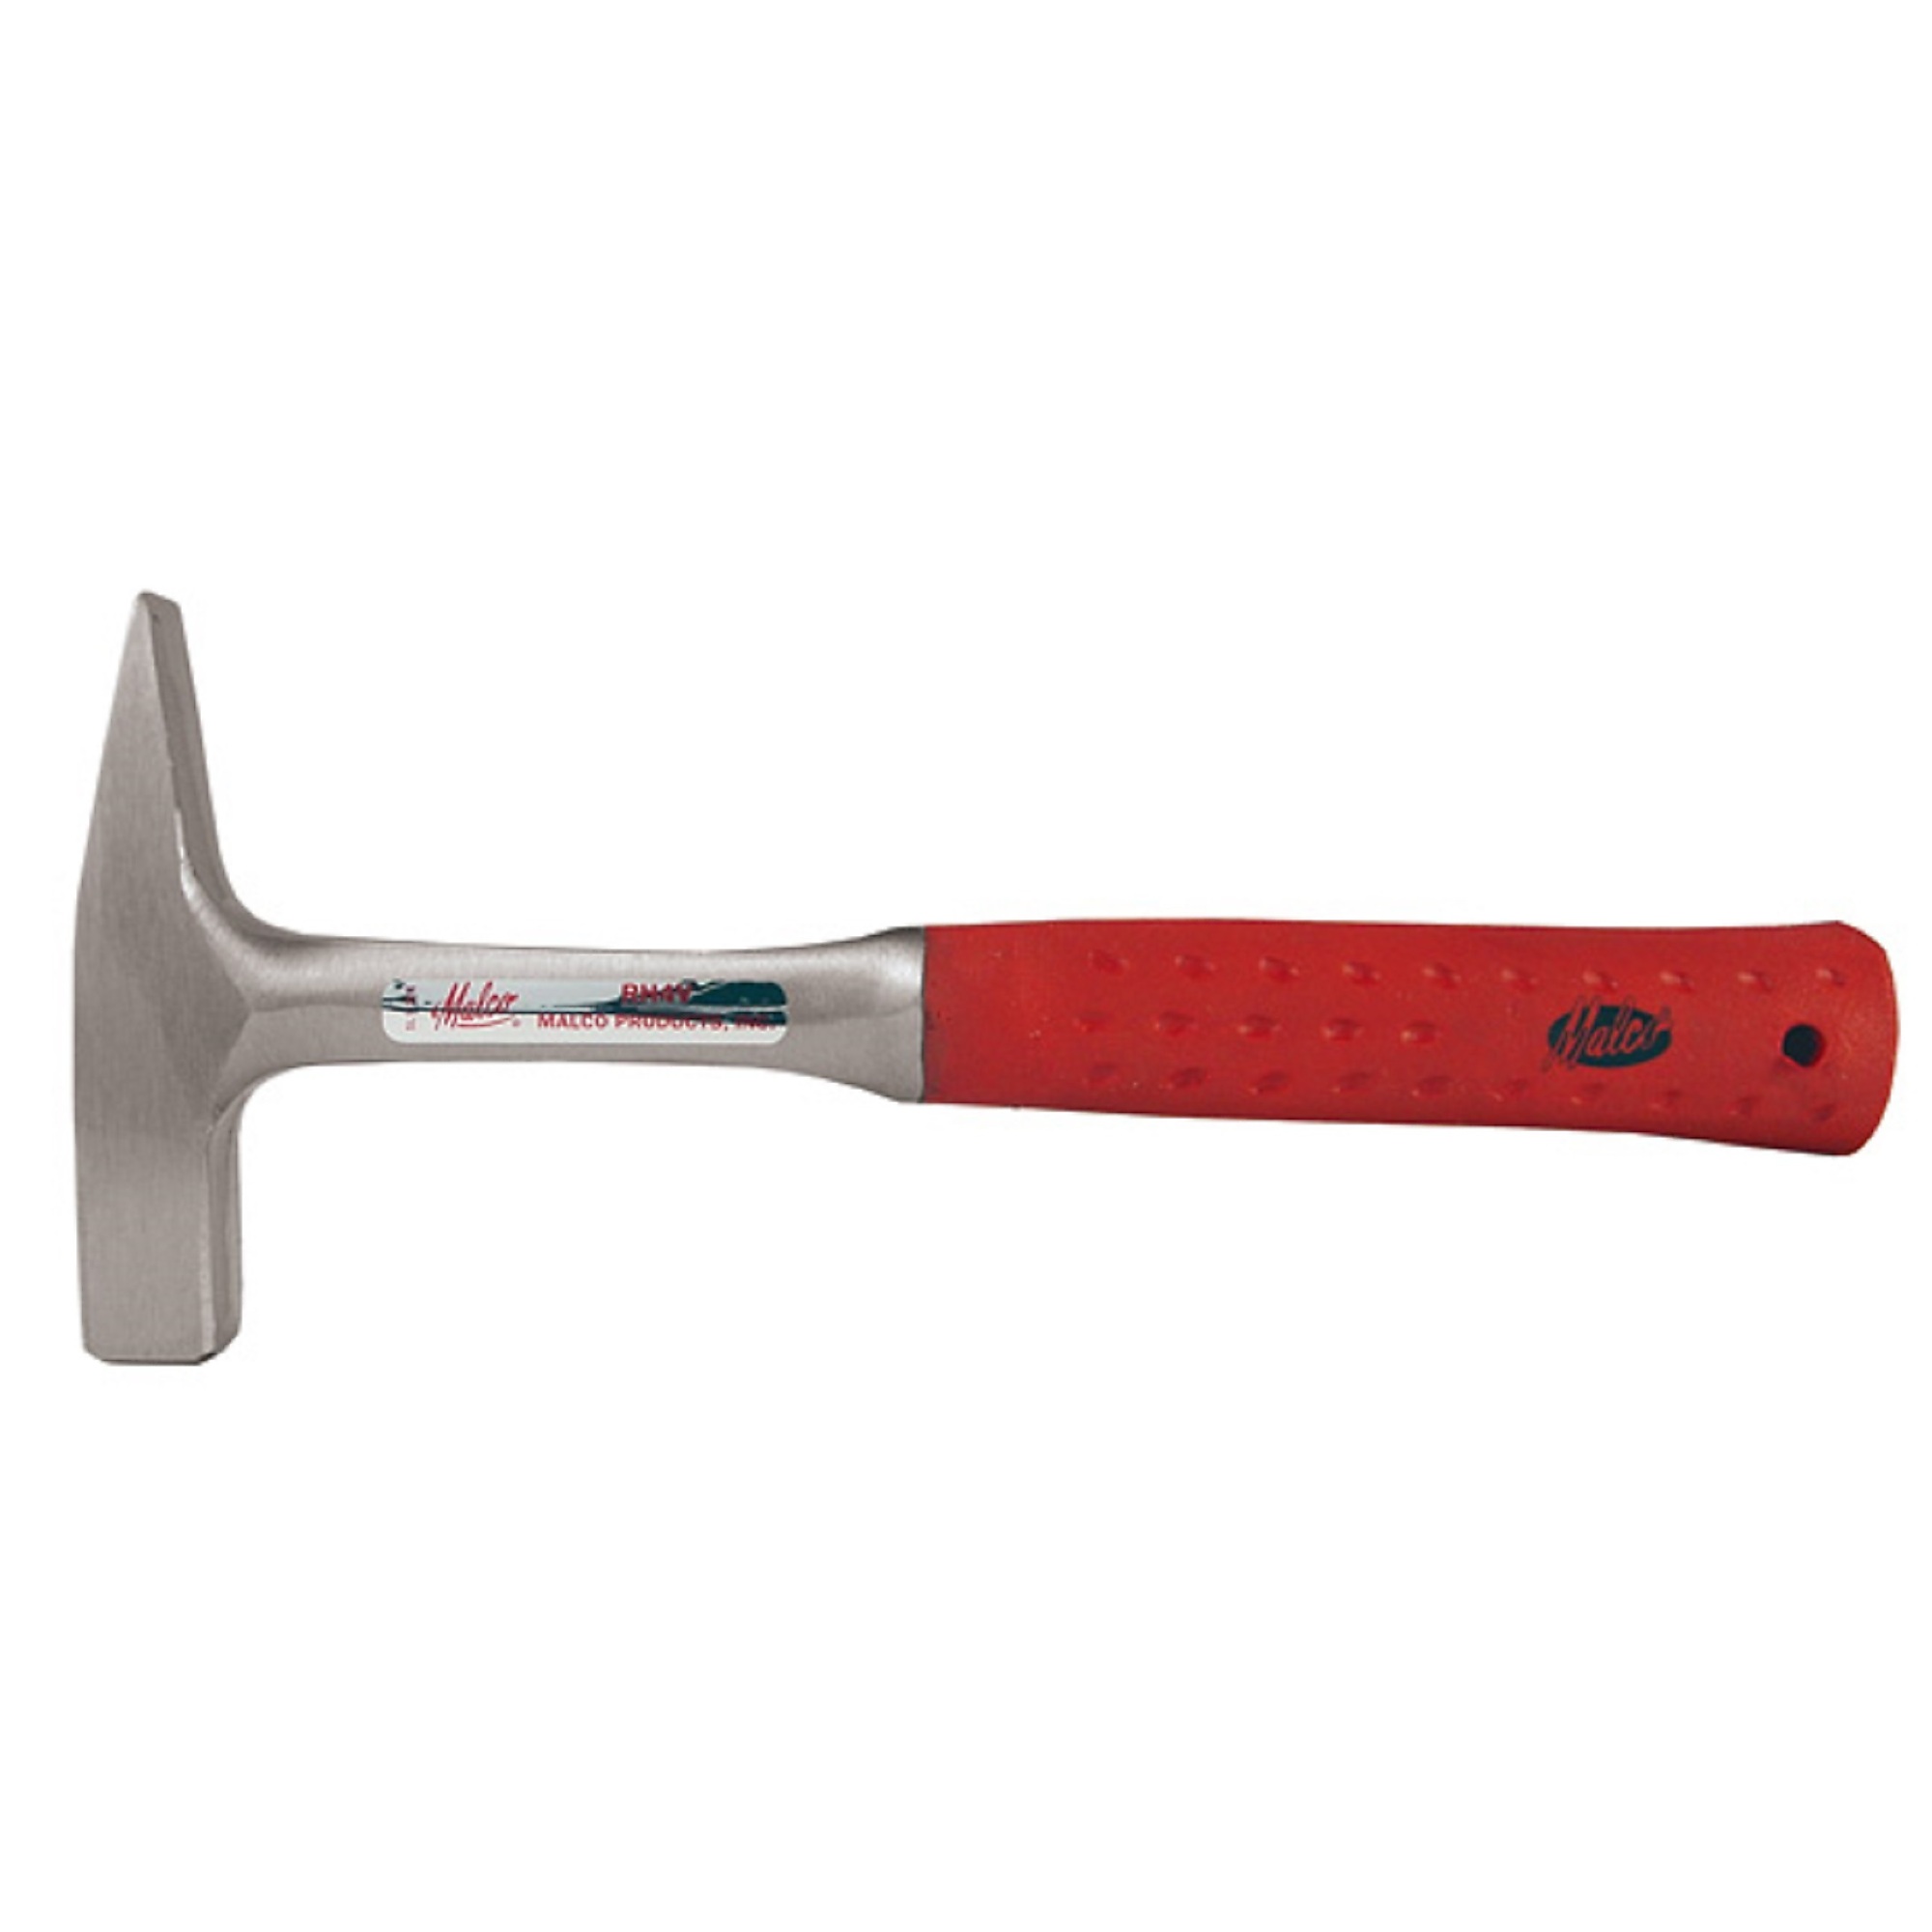 Malco RH4 12-Ounce Riveting Hammer -Leather Grip